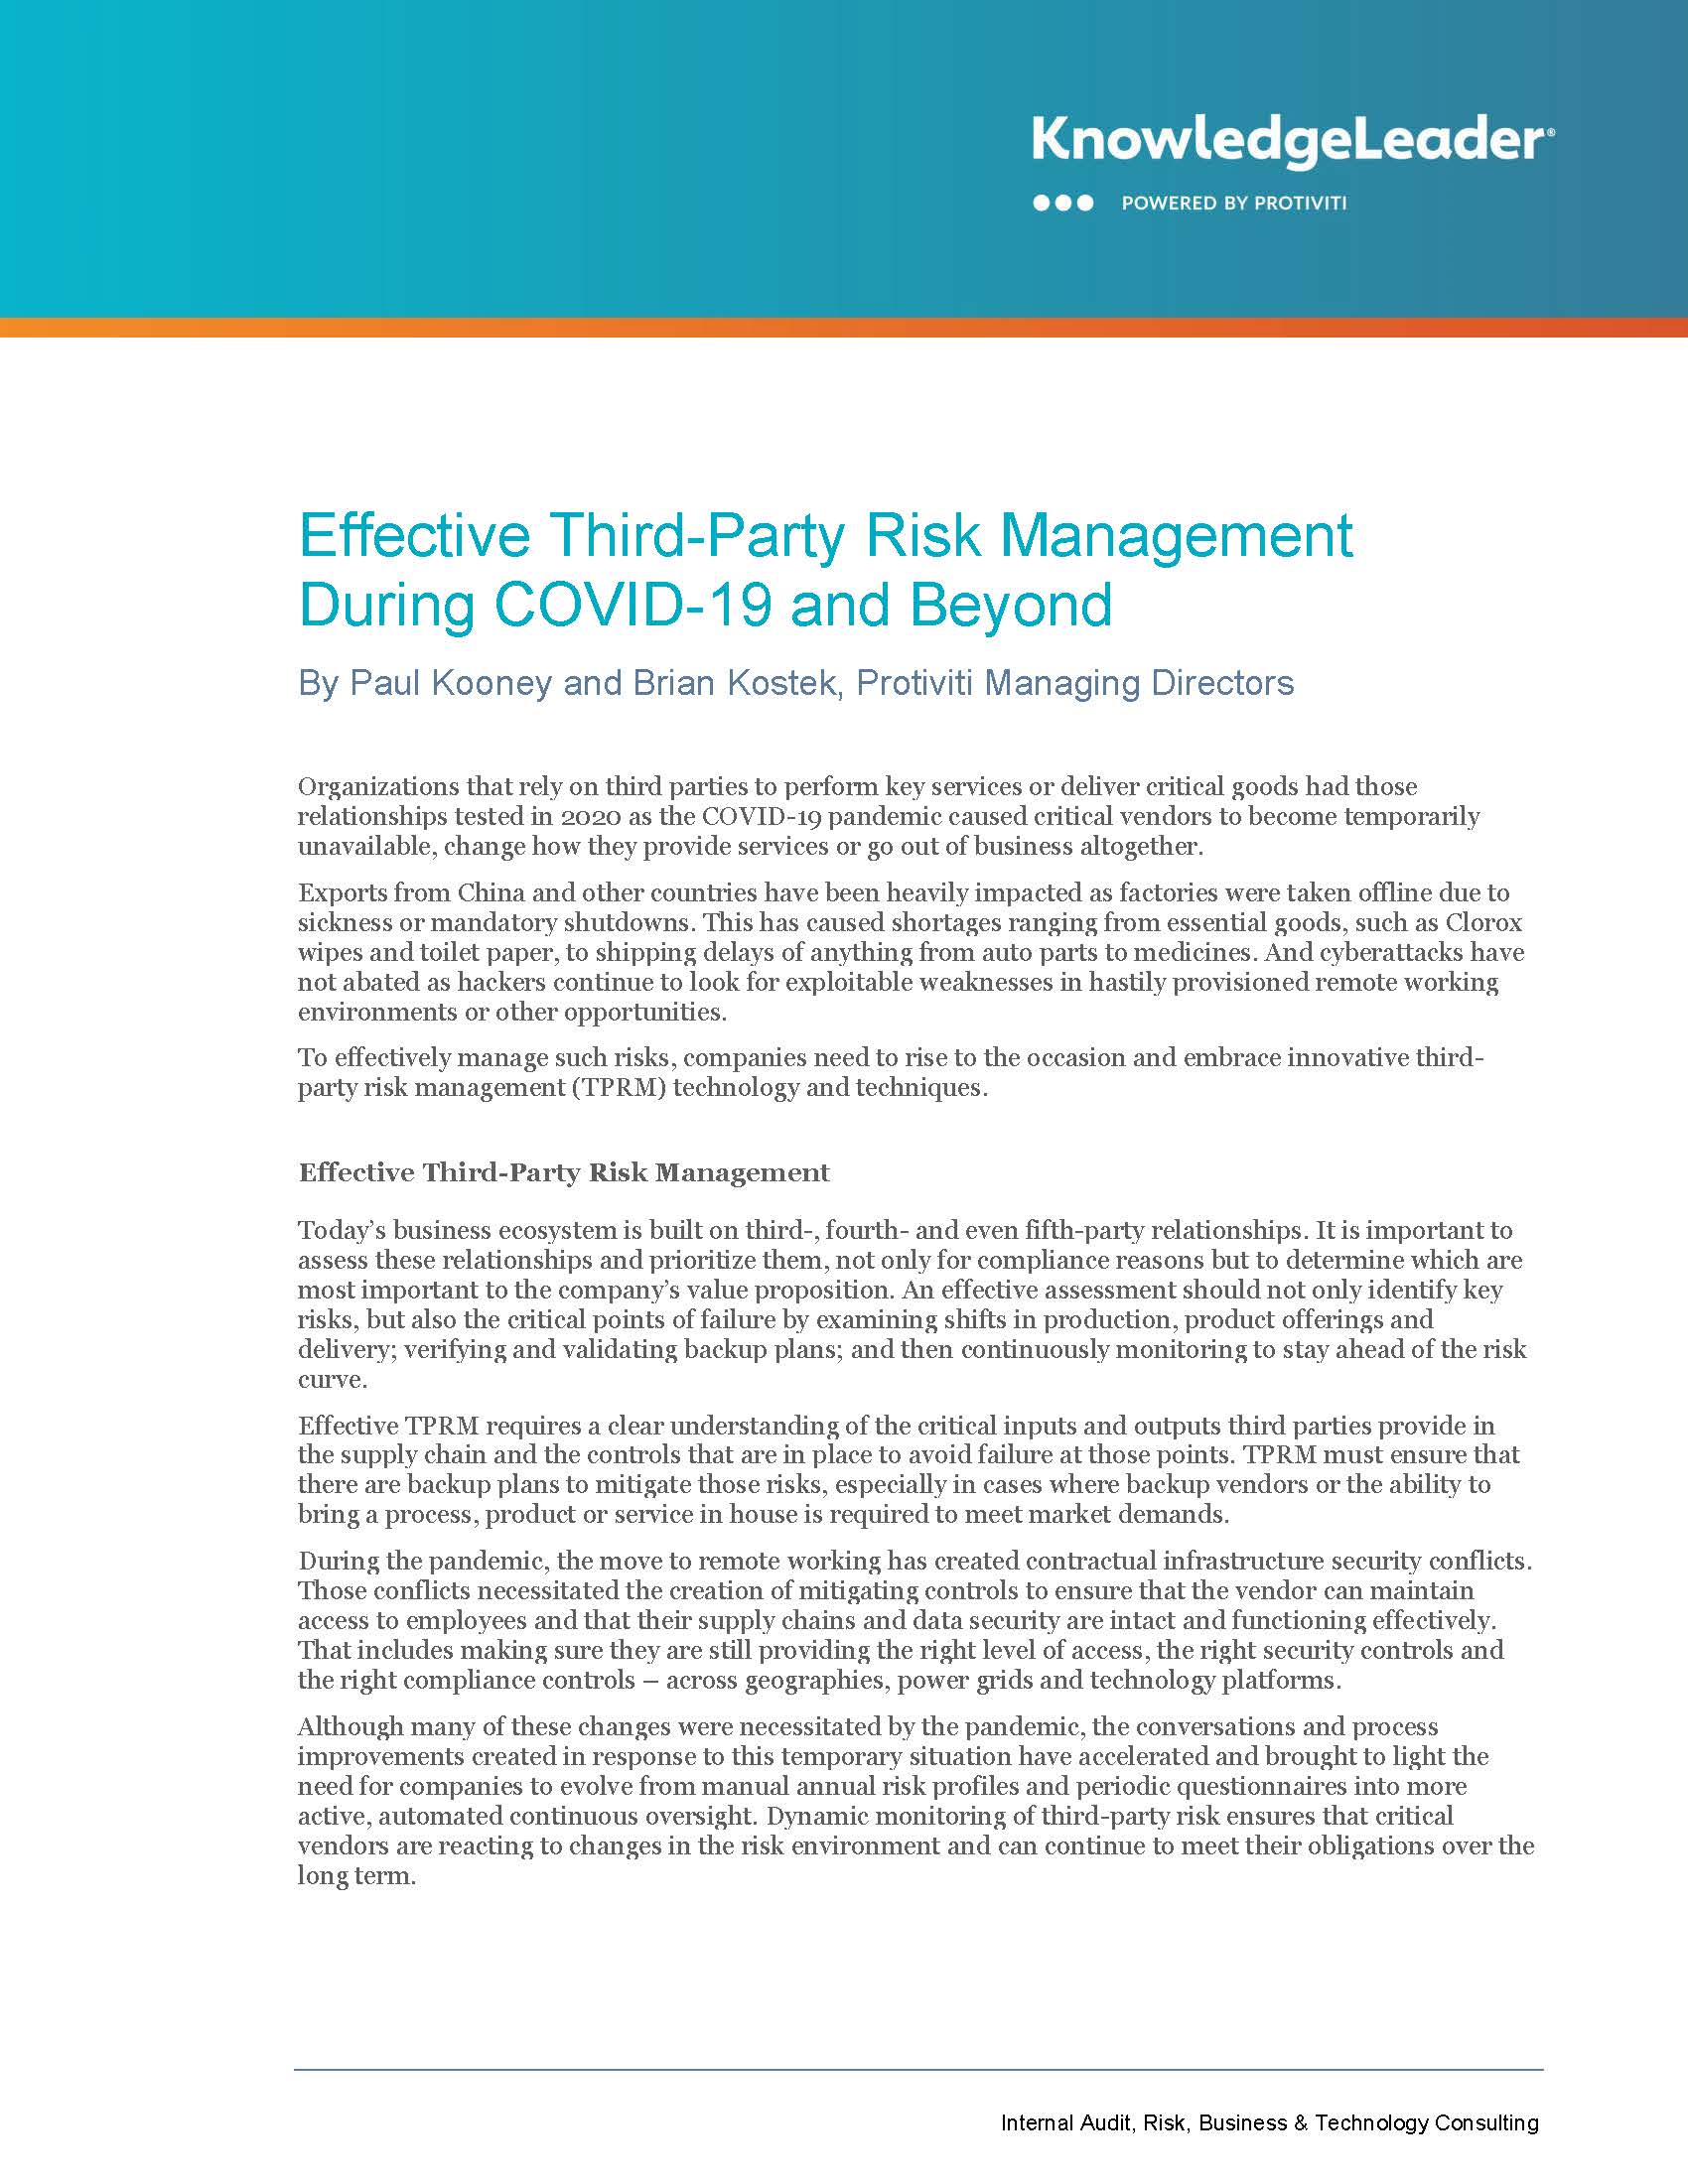 Screenshot of the first page of Effective Third-Party Risk Management During COVID-19 and Beyond